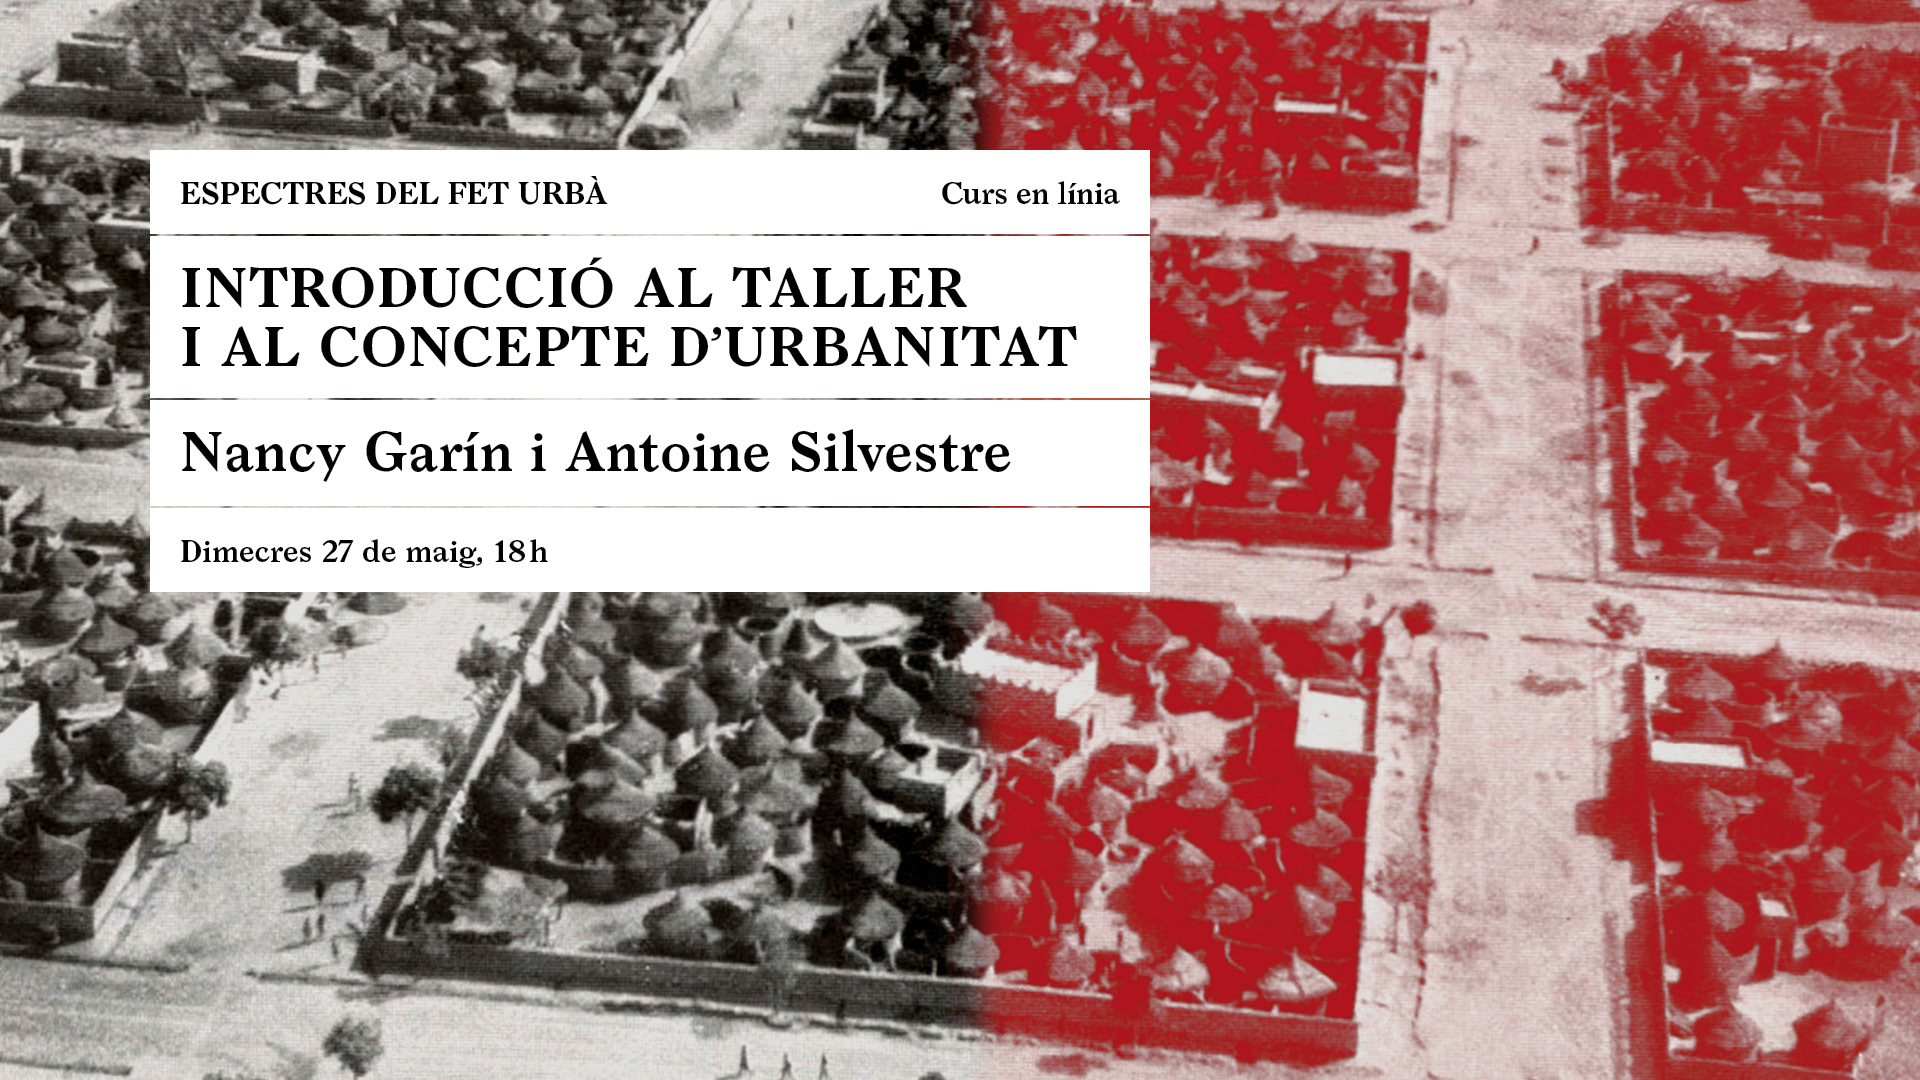 Introduction to the workshop and to the concept of urbanity